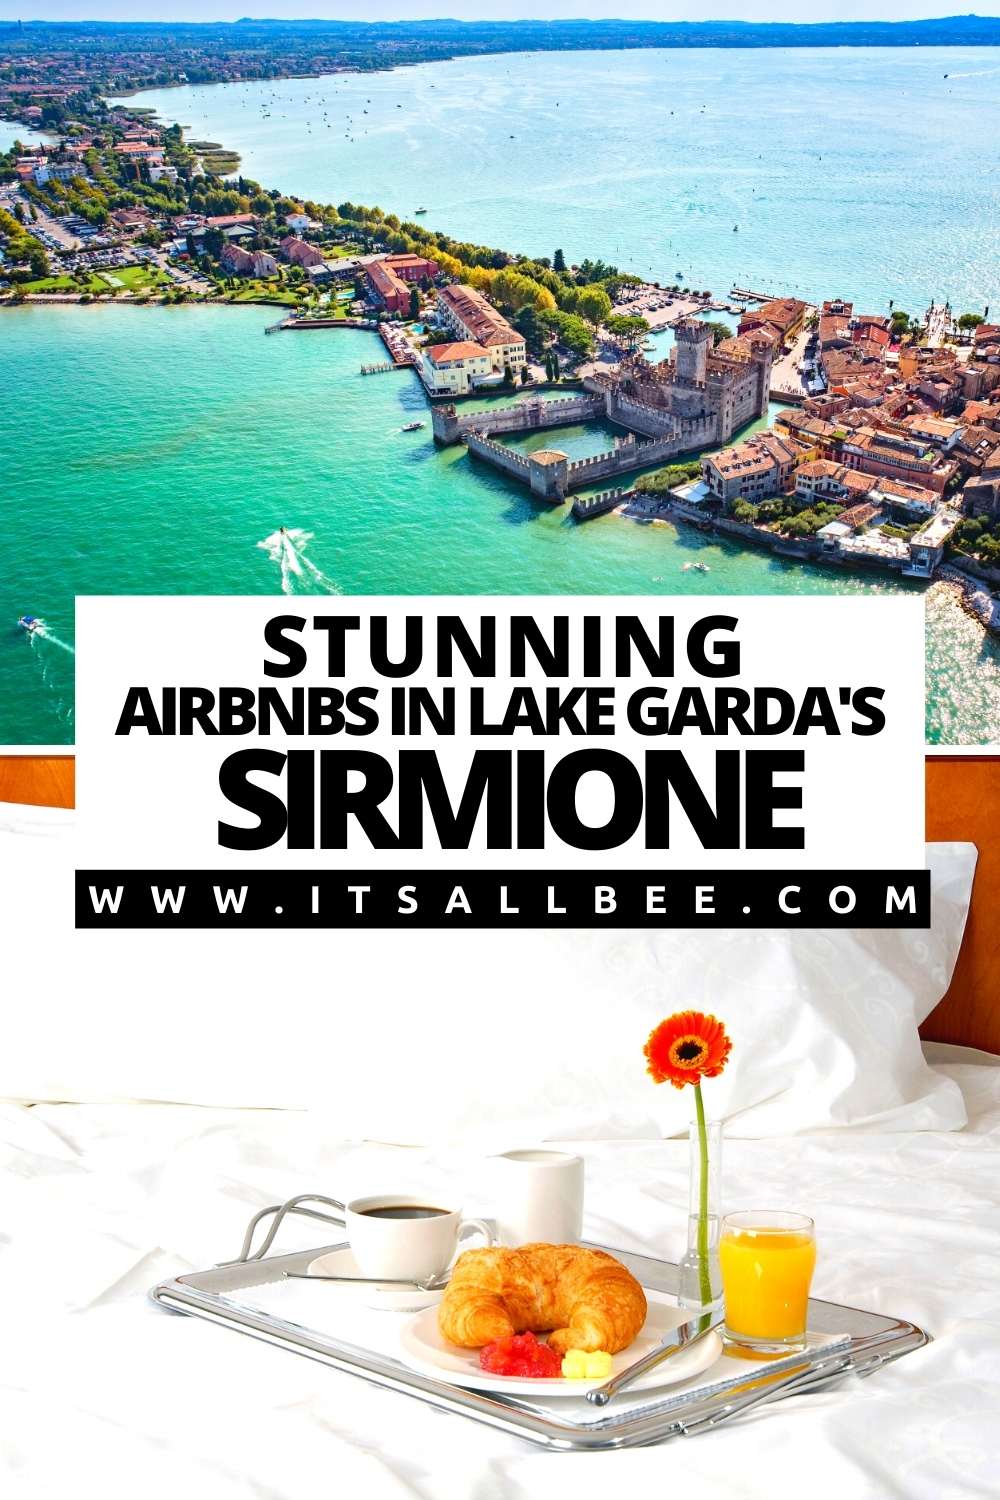 | Where To Stay In Lake Garda | Best Hotels In Sirmione Italy | Best Airbnbs In Sirmione Italy